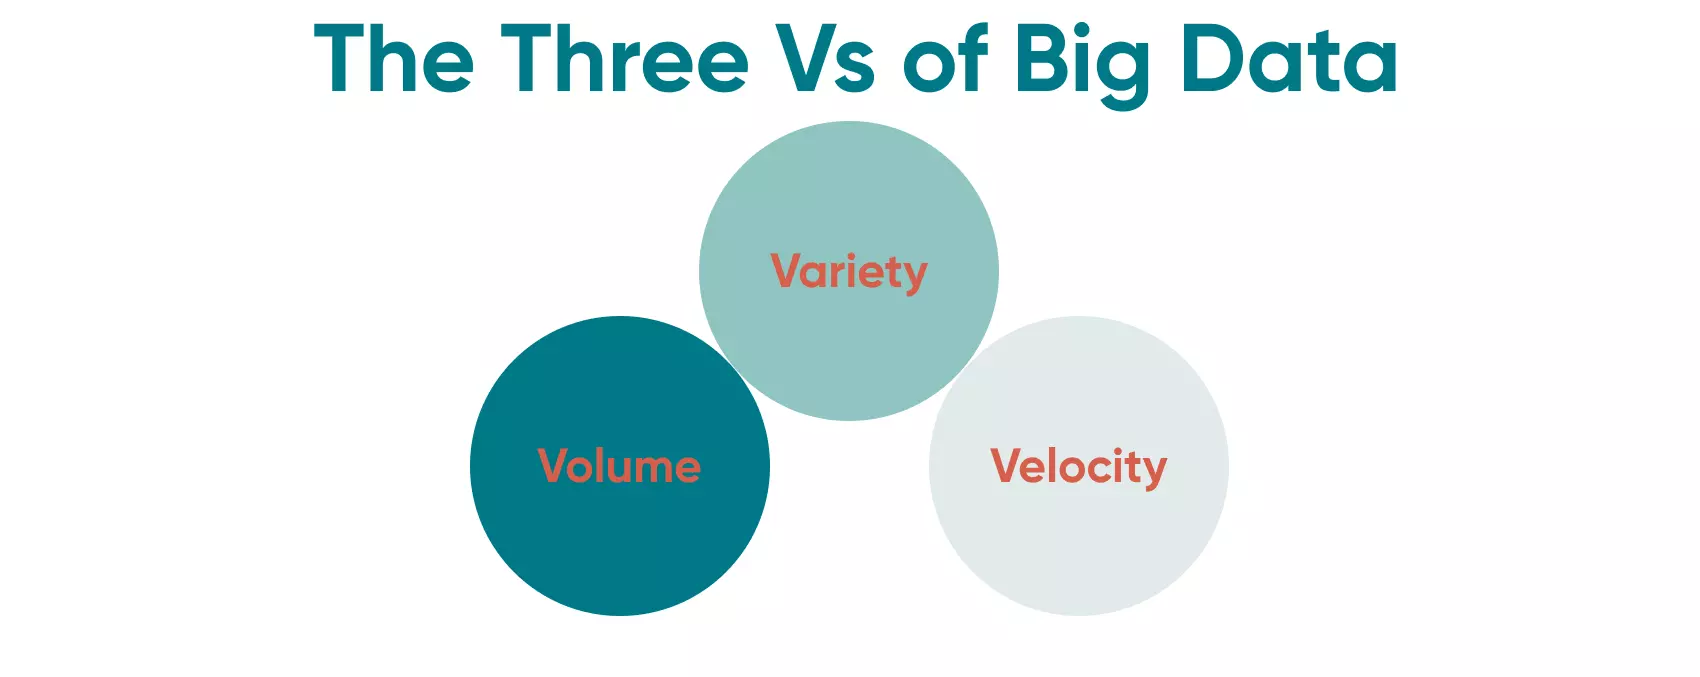 The Three Vs of Big Data was presented by Doug Delaney in 2001 as a result of his research into the phonetics and structure of big data. 